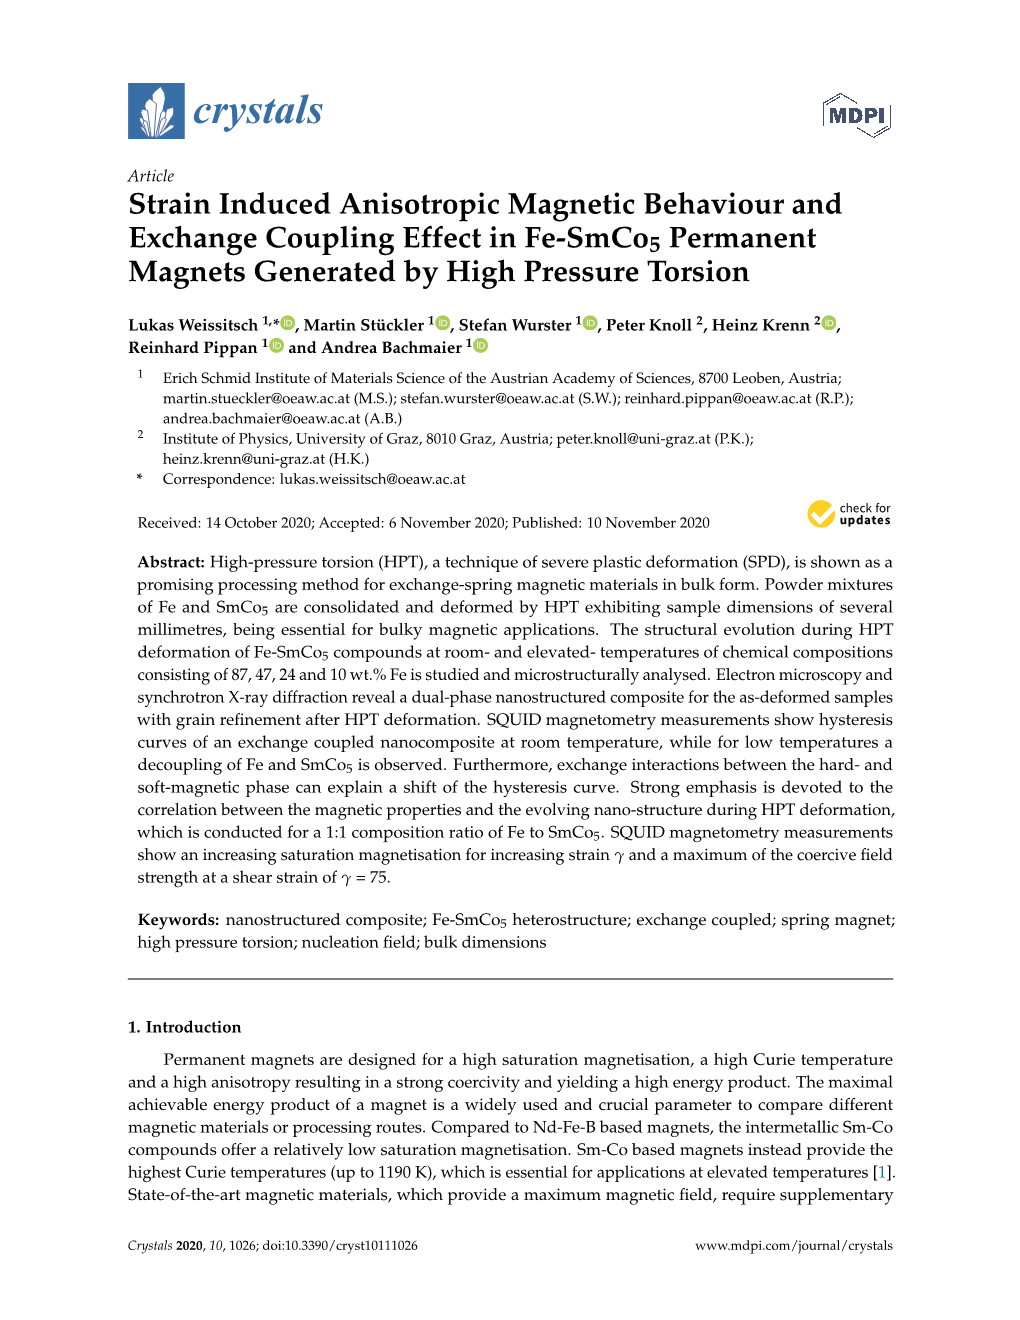 Strain Induced Anisotropic Magnetic Behaviour and Exchange Coupling Effect in Fe-Smco5 Permanent Magnets Generated by High Pressure Torsion